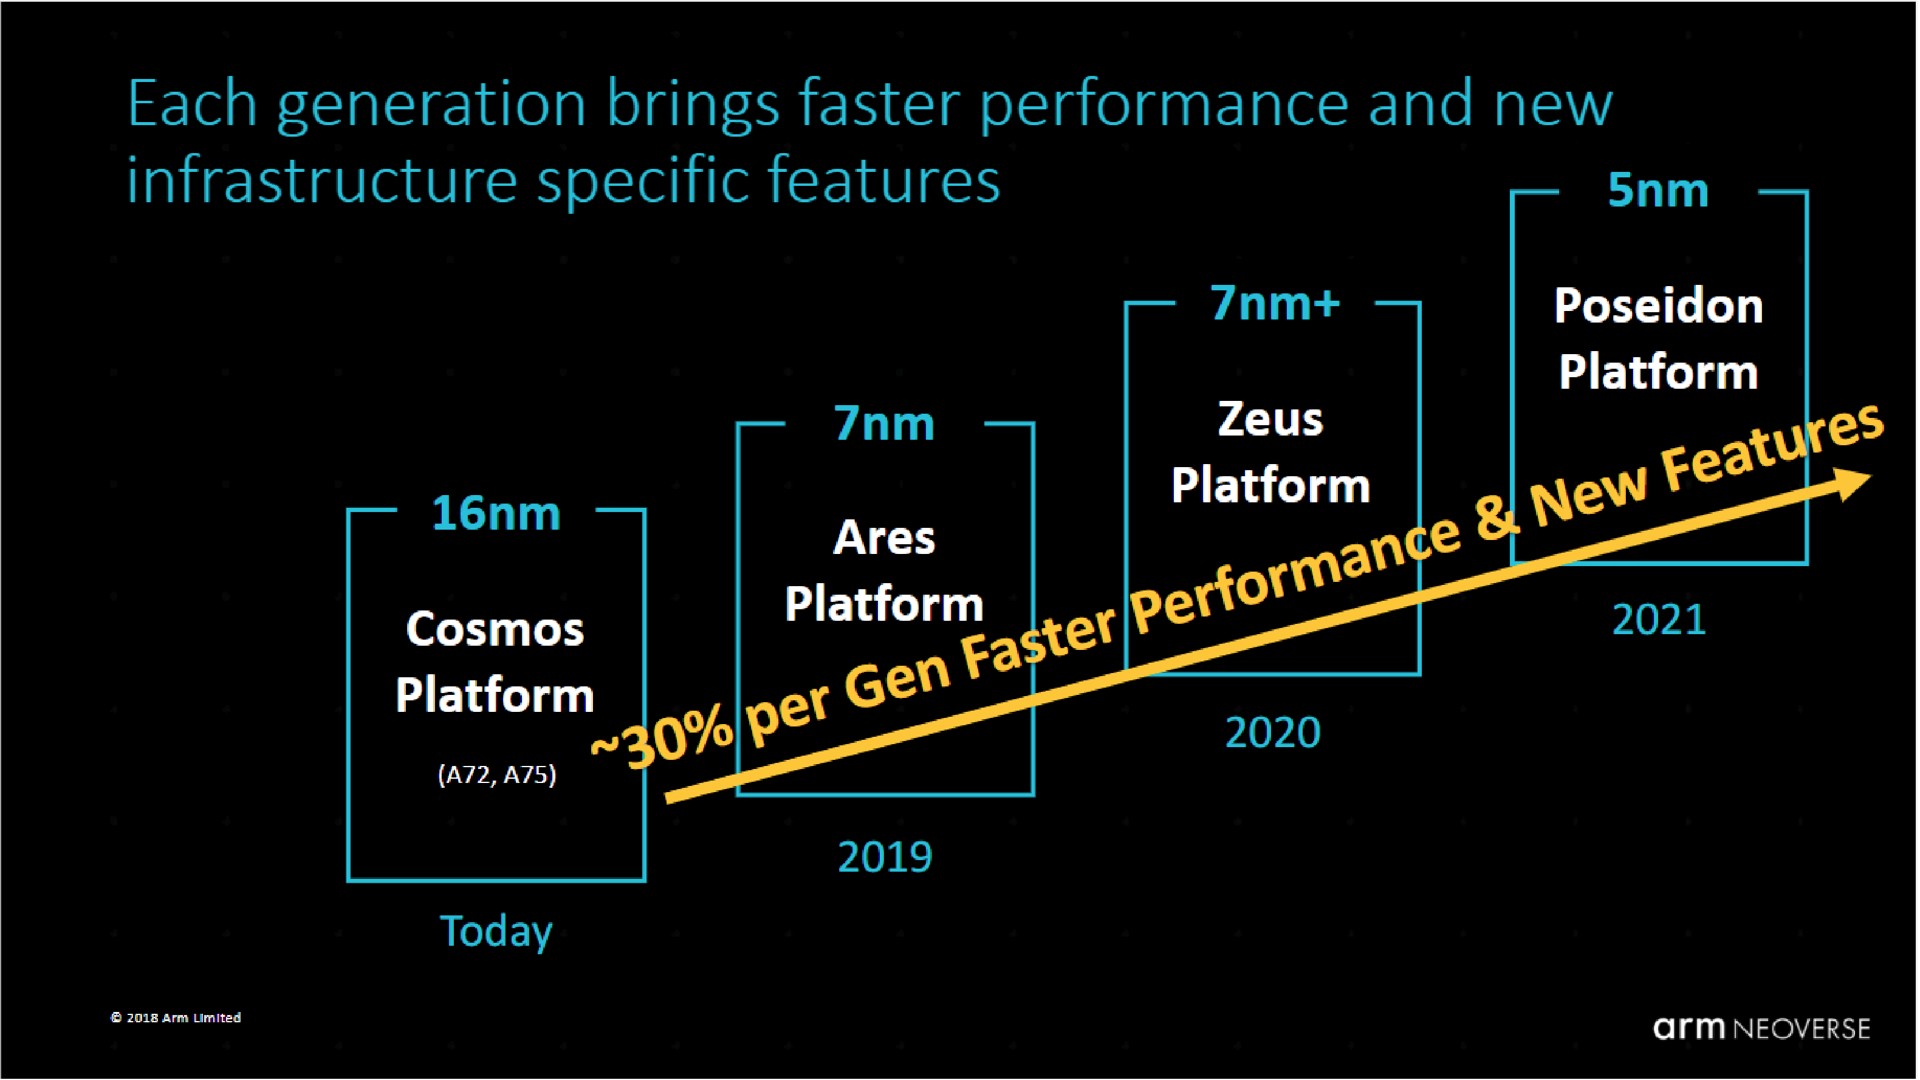 each generation brings faster performance and new infrastructure specific features | SoftBank